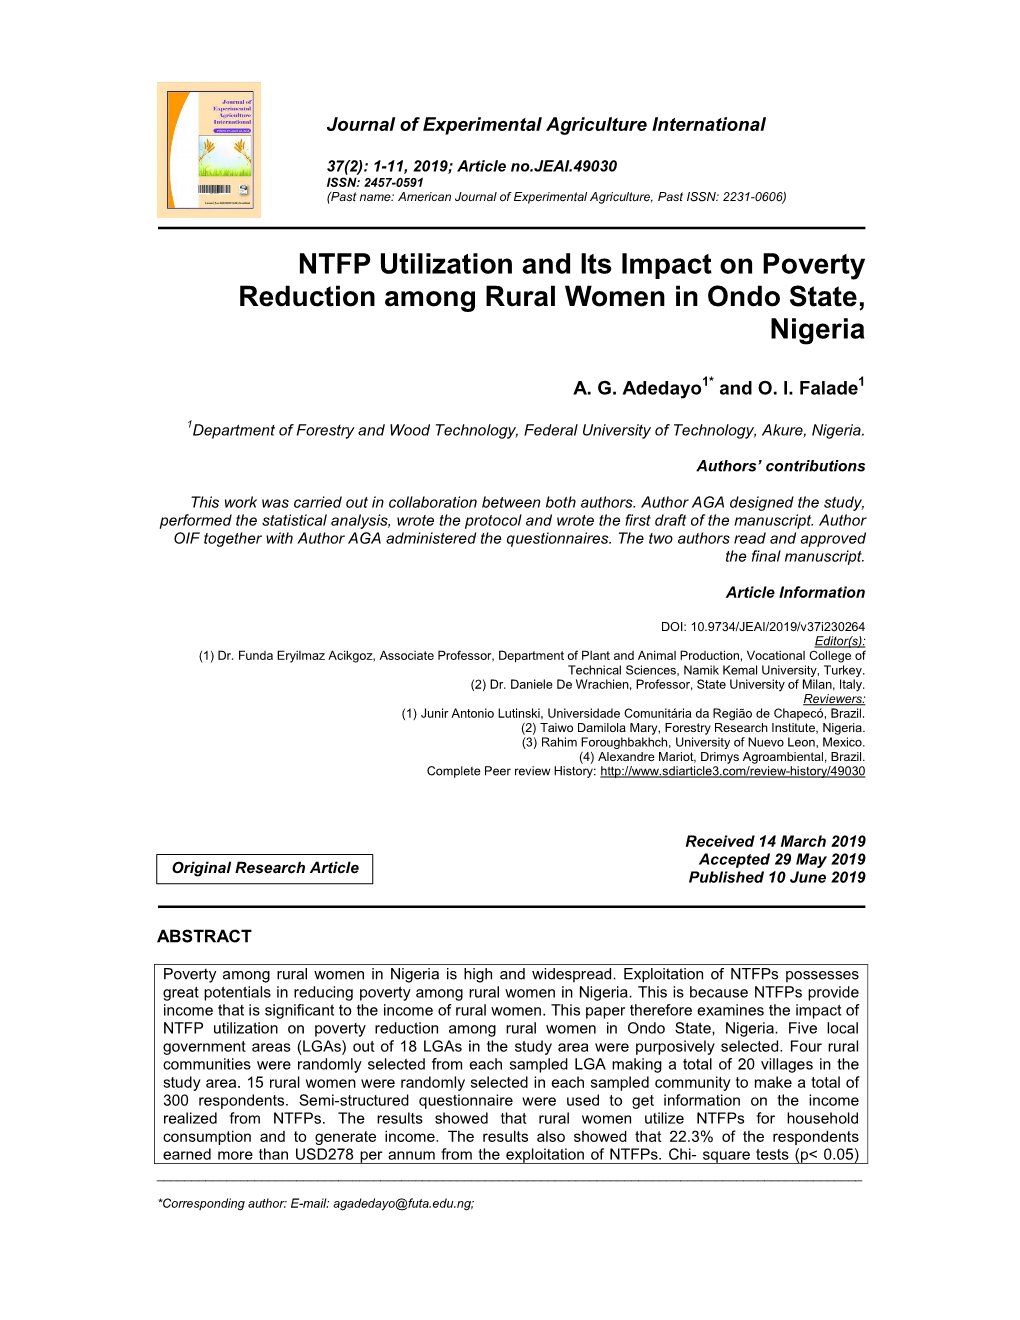 NTFP Utilization and Its Impact on Poverty Reduction Among Rural Women in Ondo State, Nigeria